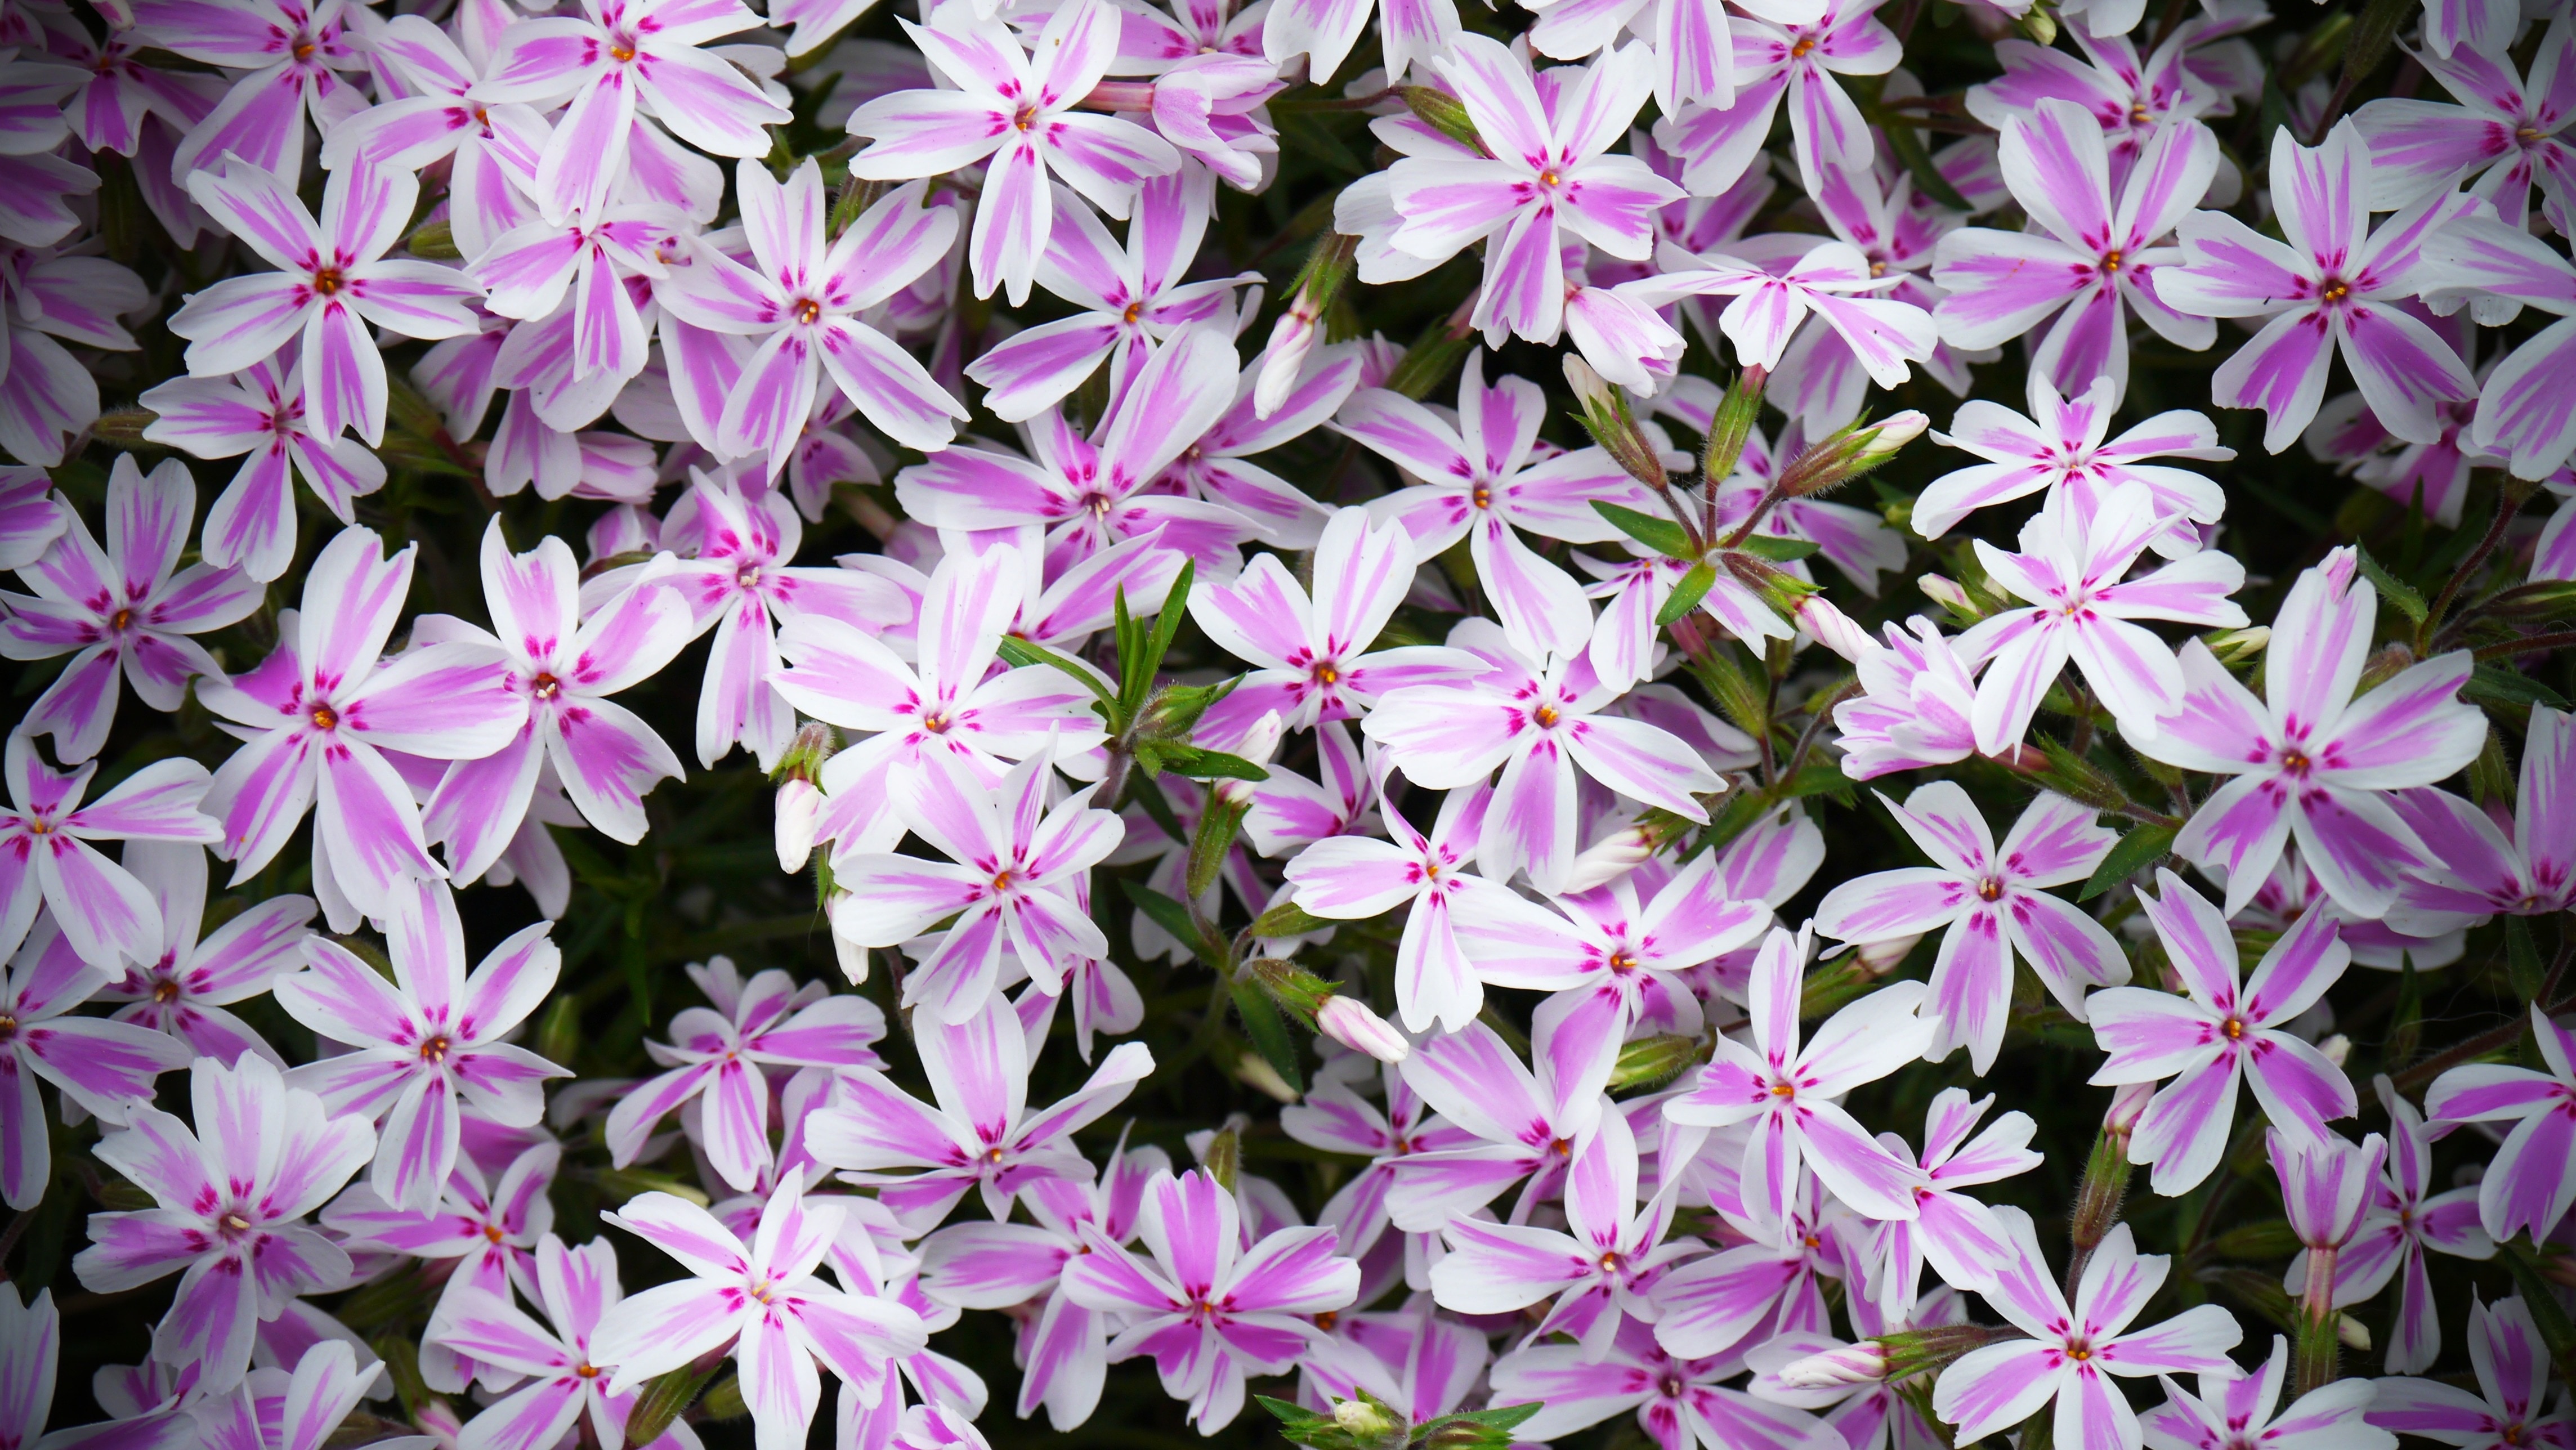 purple and white 5 petaled flowers